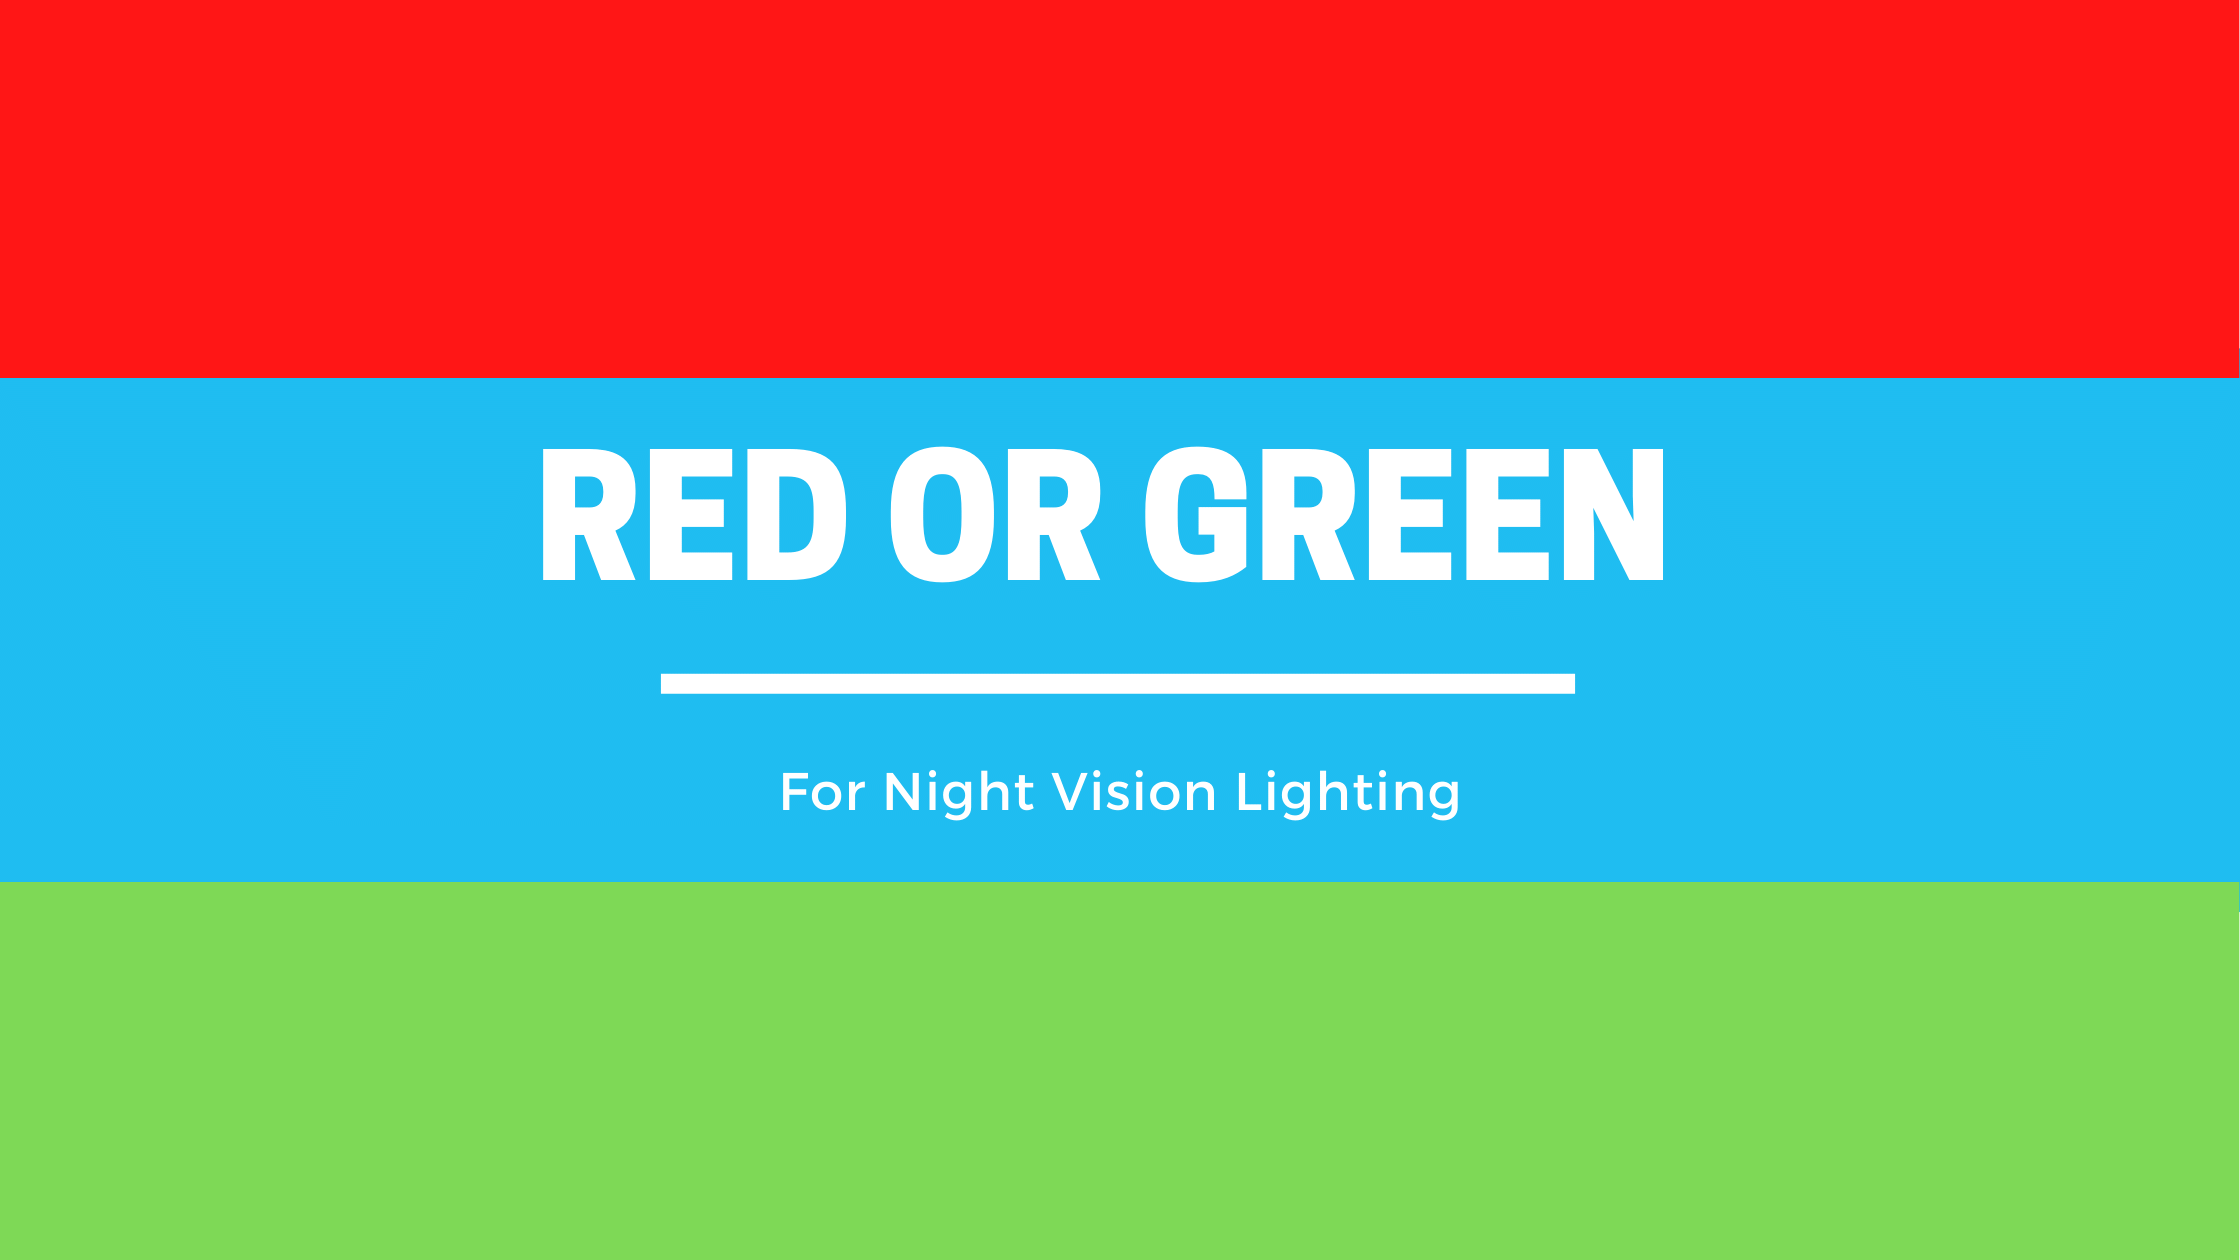 Red Or Green for Night Vision Lighting